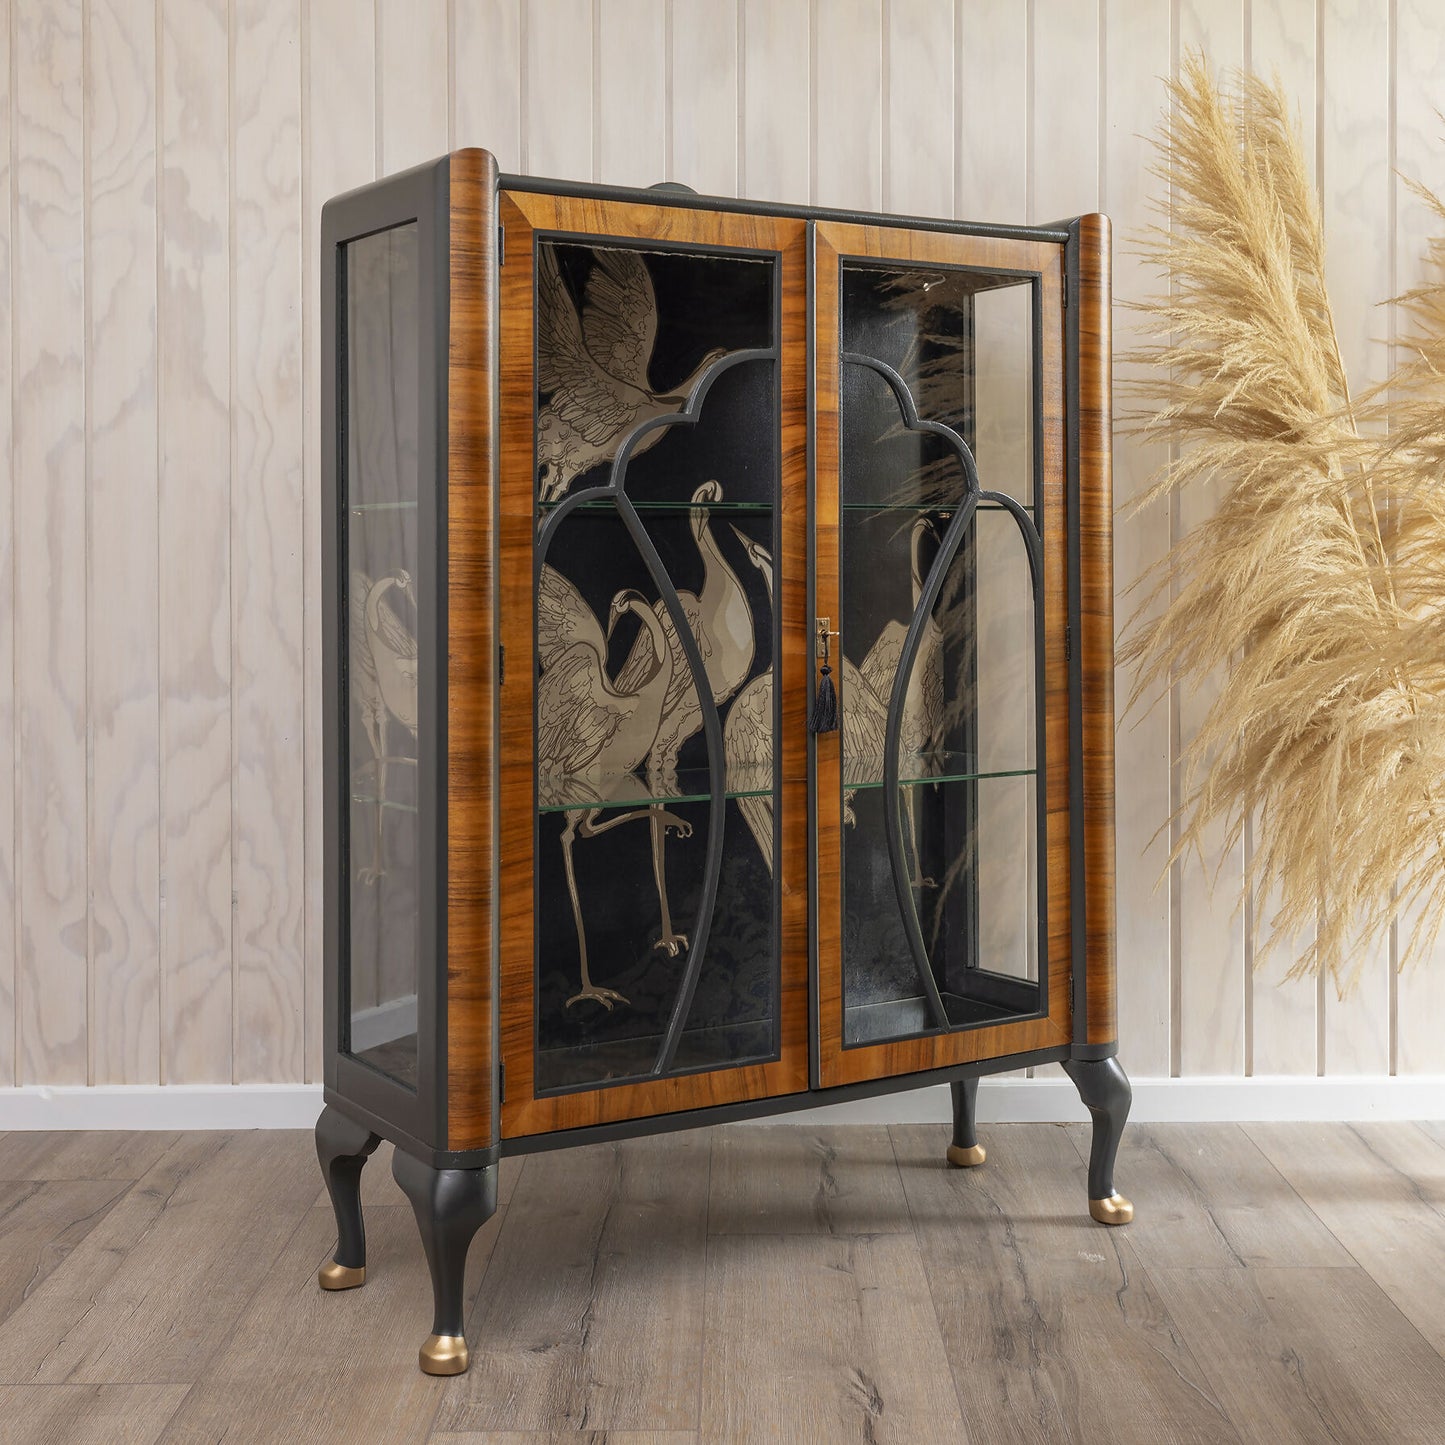 A stunning Art Deco drinks cabinet, distinguished by its unique curved top and decoupage featuring crane fabric in black and subtle gold.